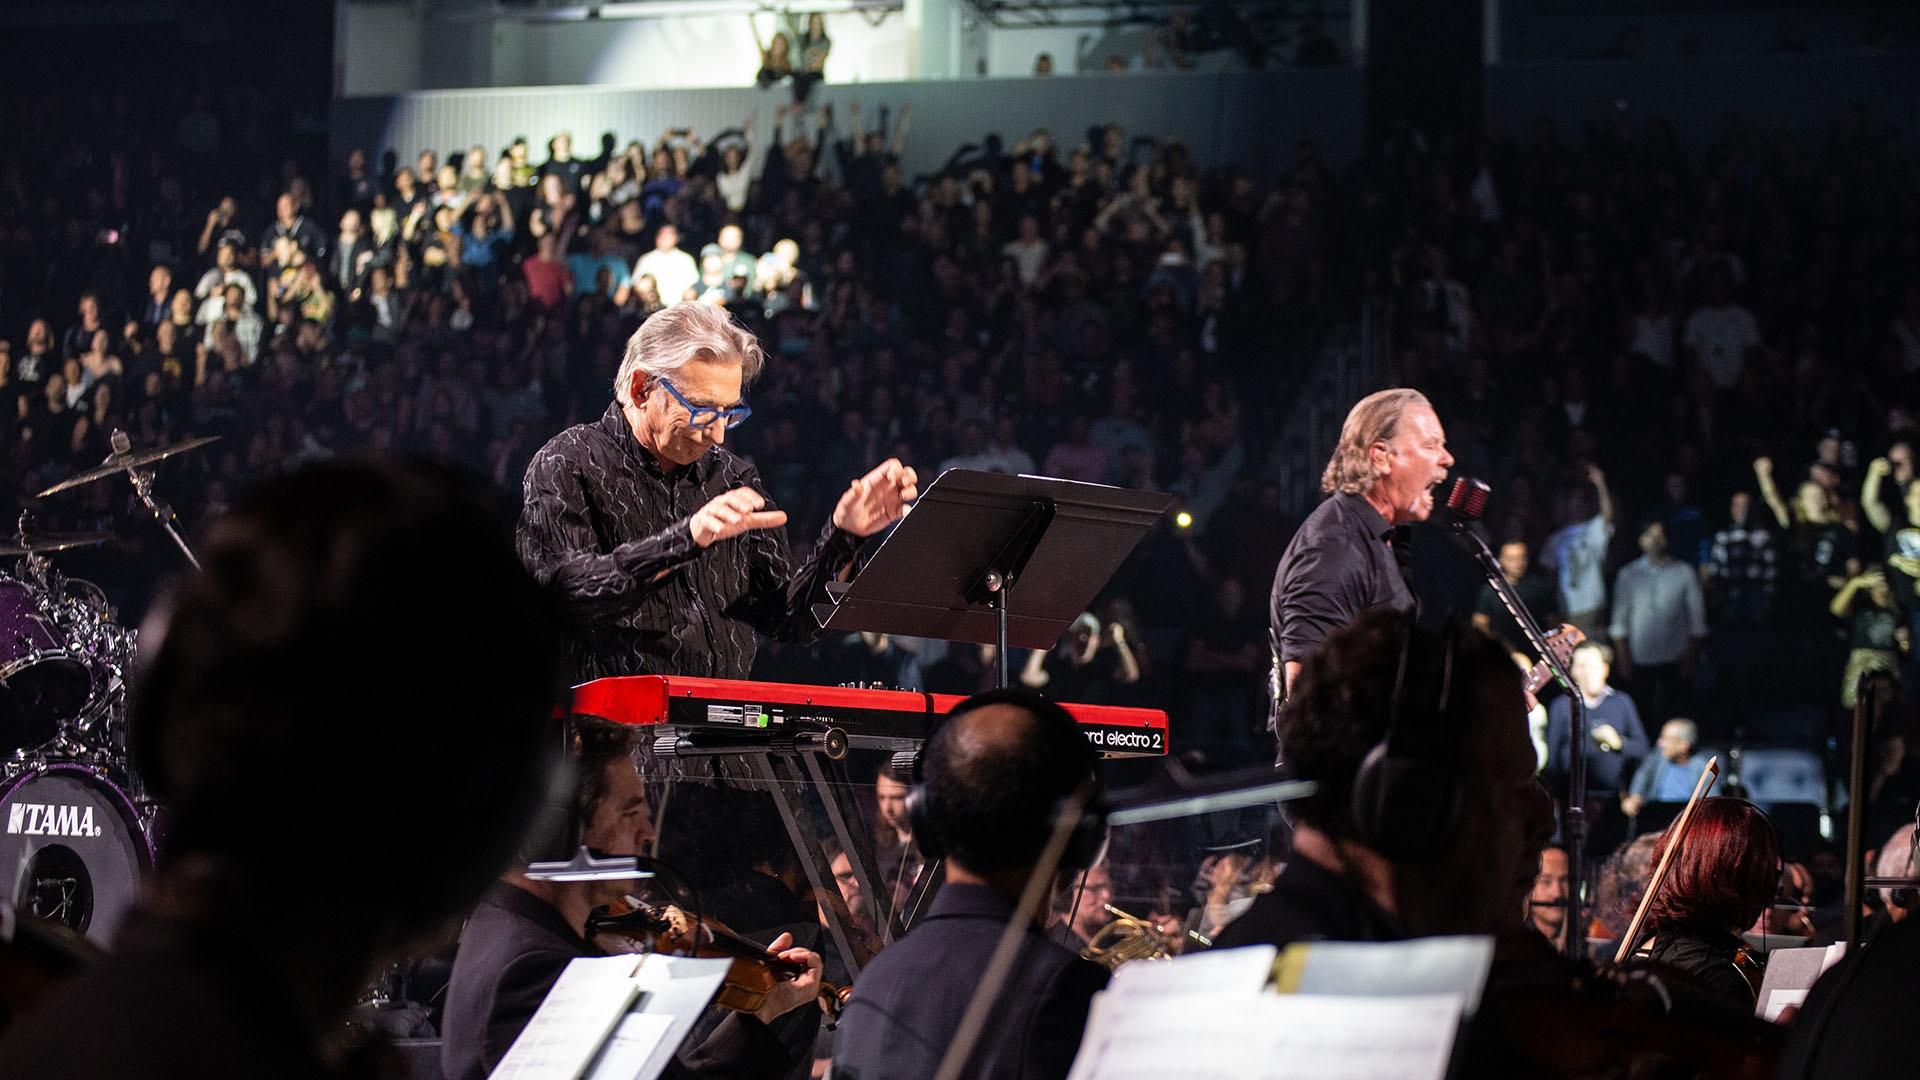 Michael Tilson Thomas and James Hetfield pictured on stage.